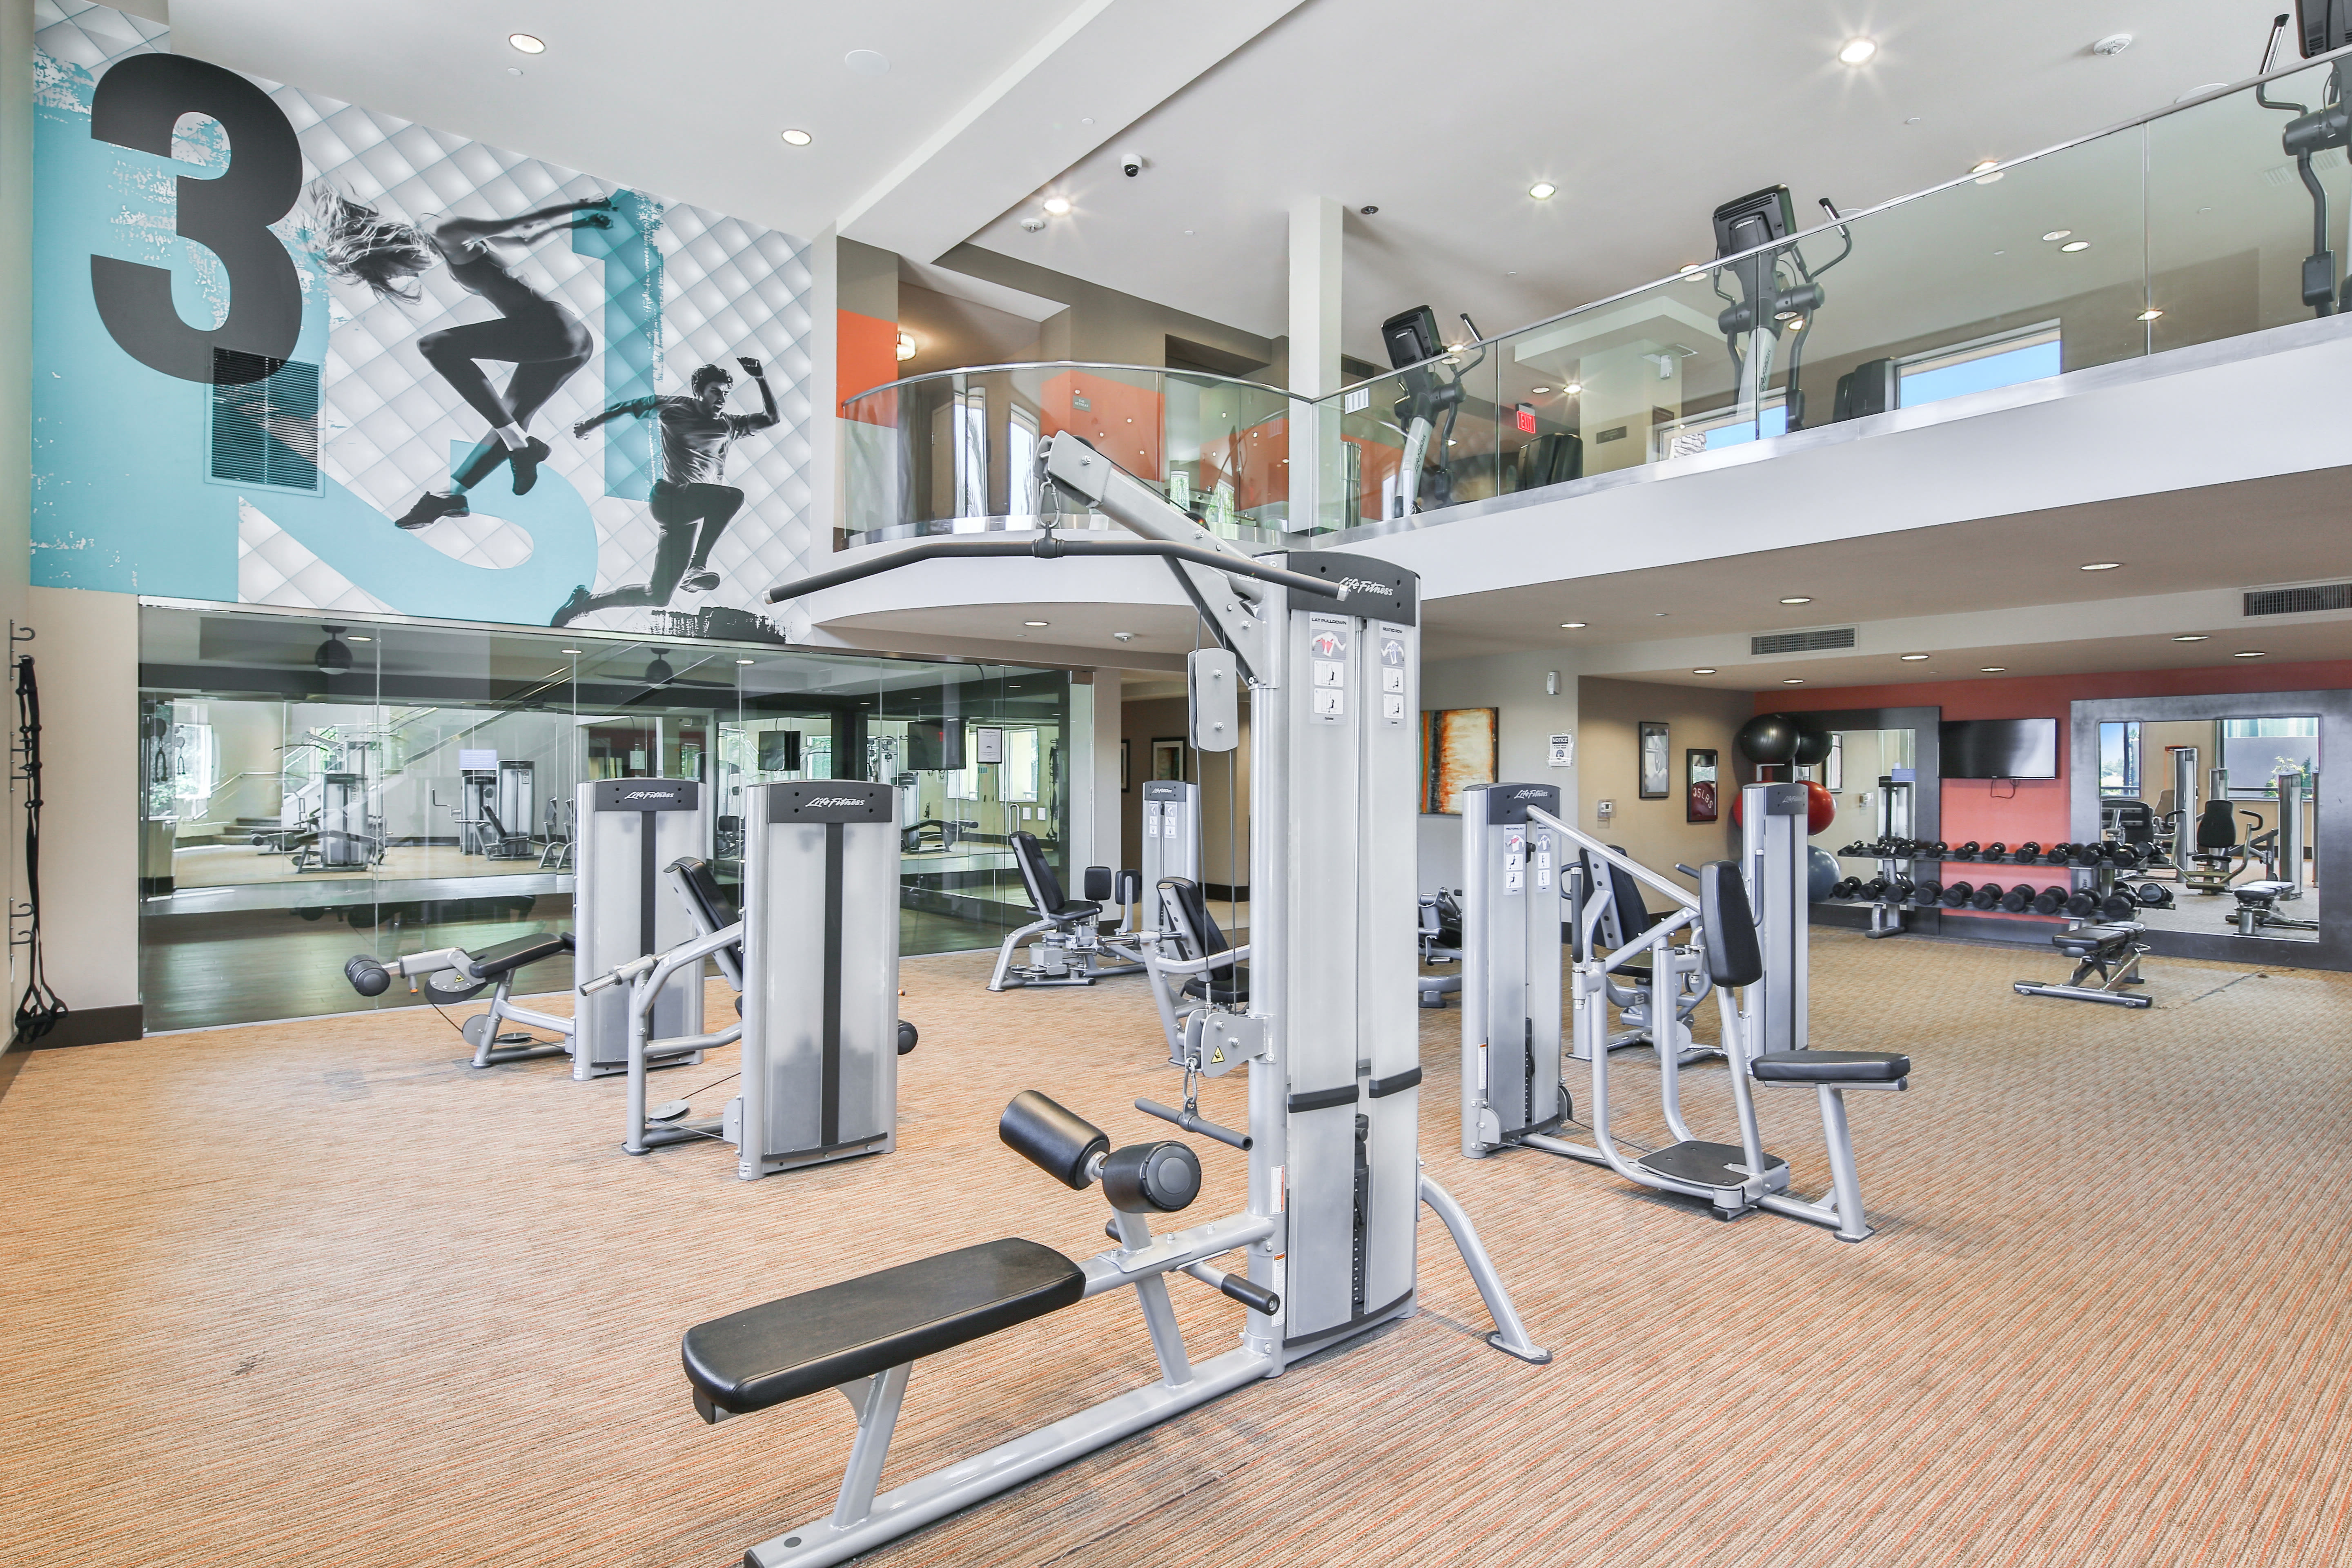 Fitness center at The Boulevard Apartment Homes in Woodland Hills, California